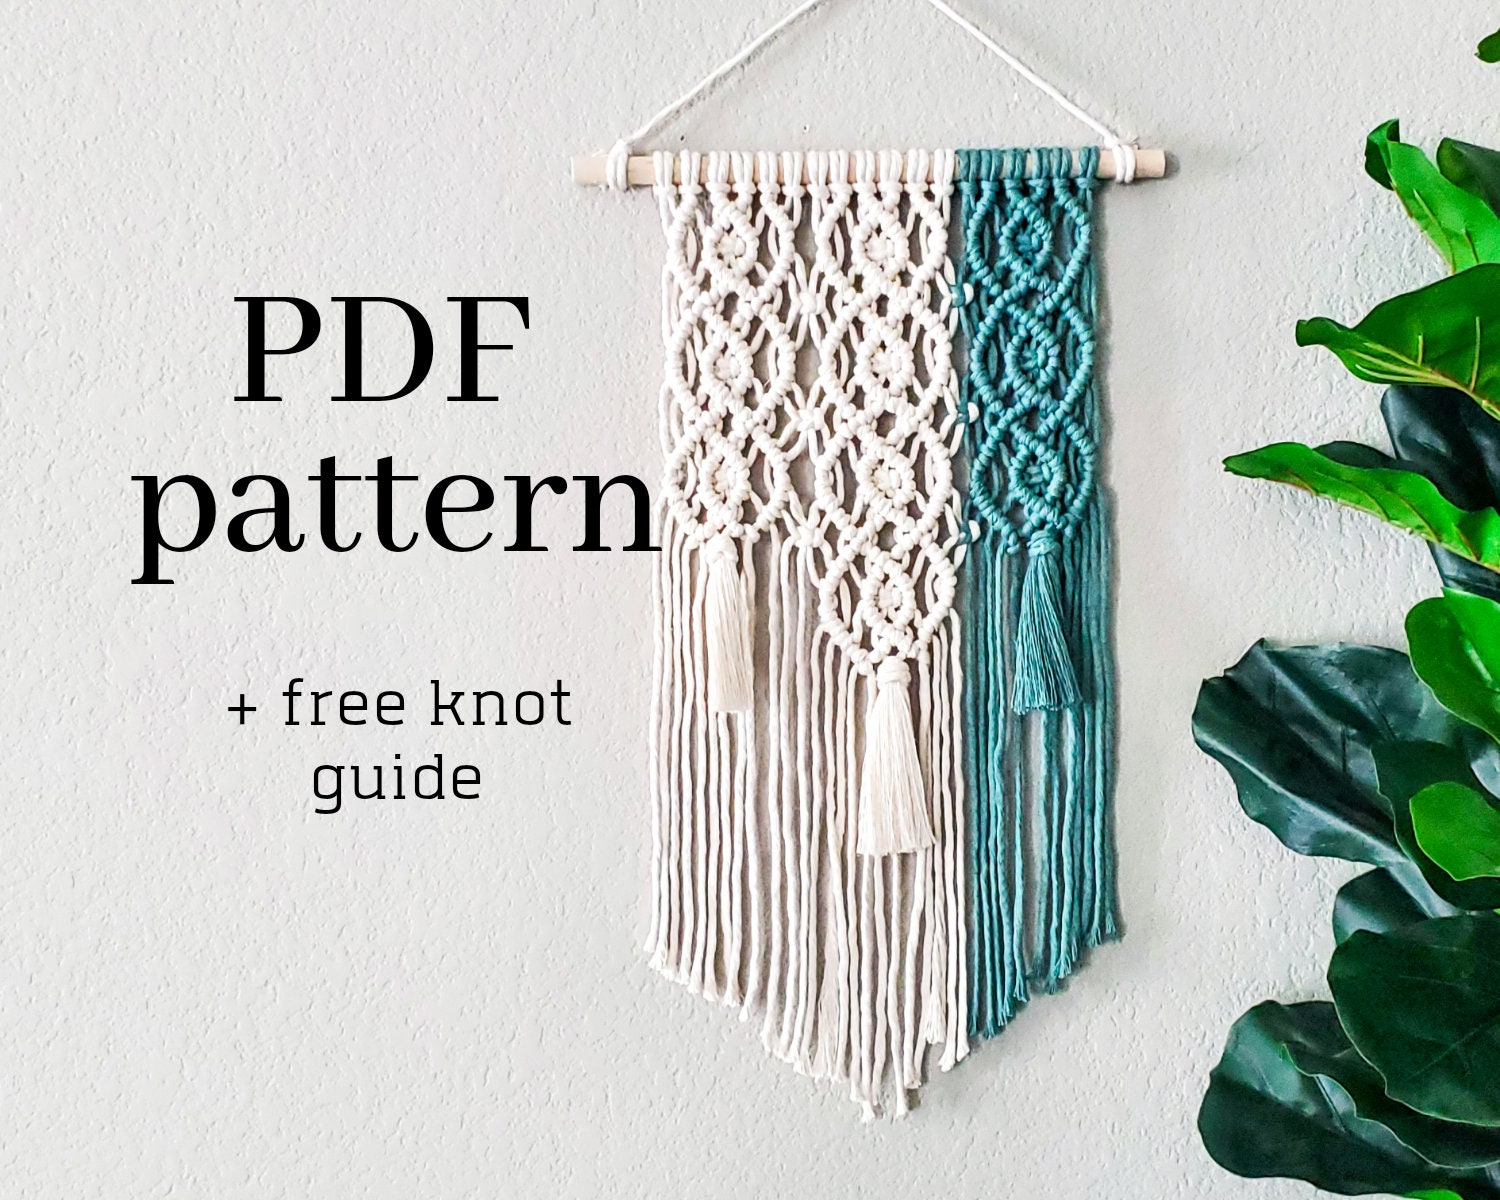 macrame wall hanging pattern. instant download pdf & free knot guide. DIY macrame tutorial step by step pattern. DIY boho wall home decor.